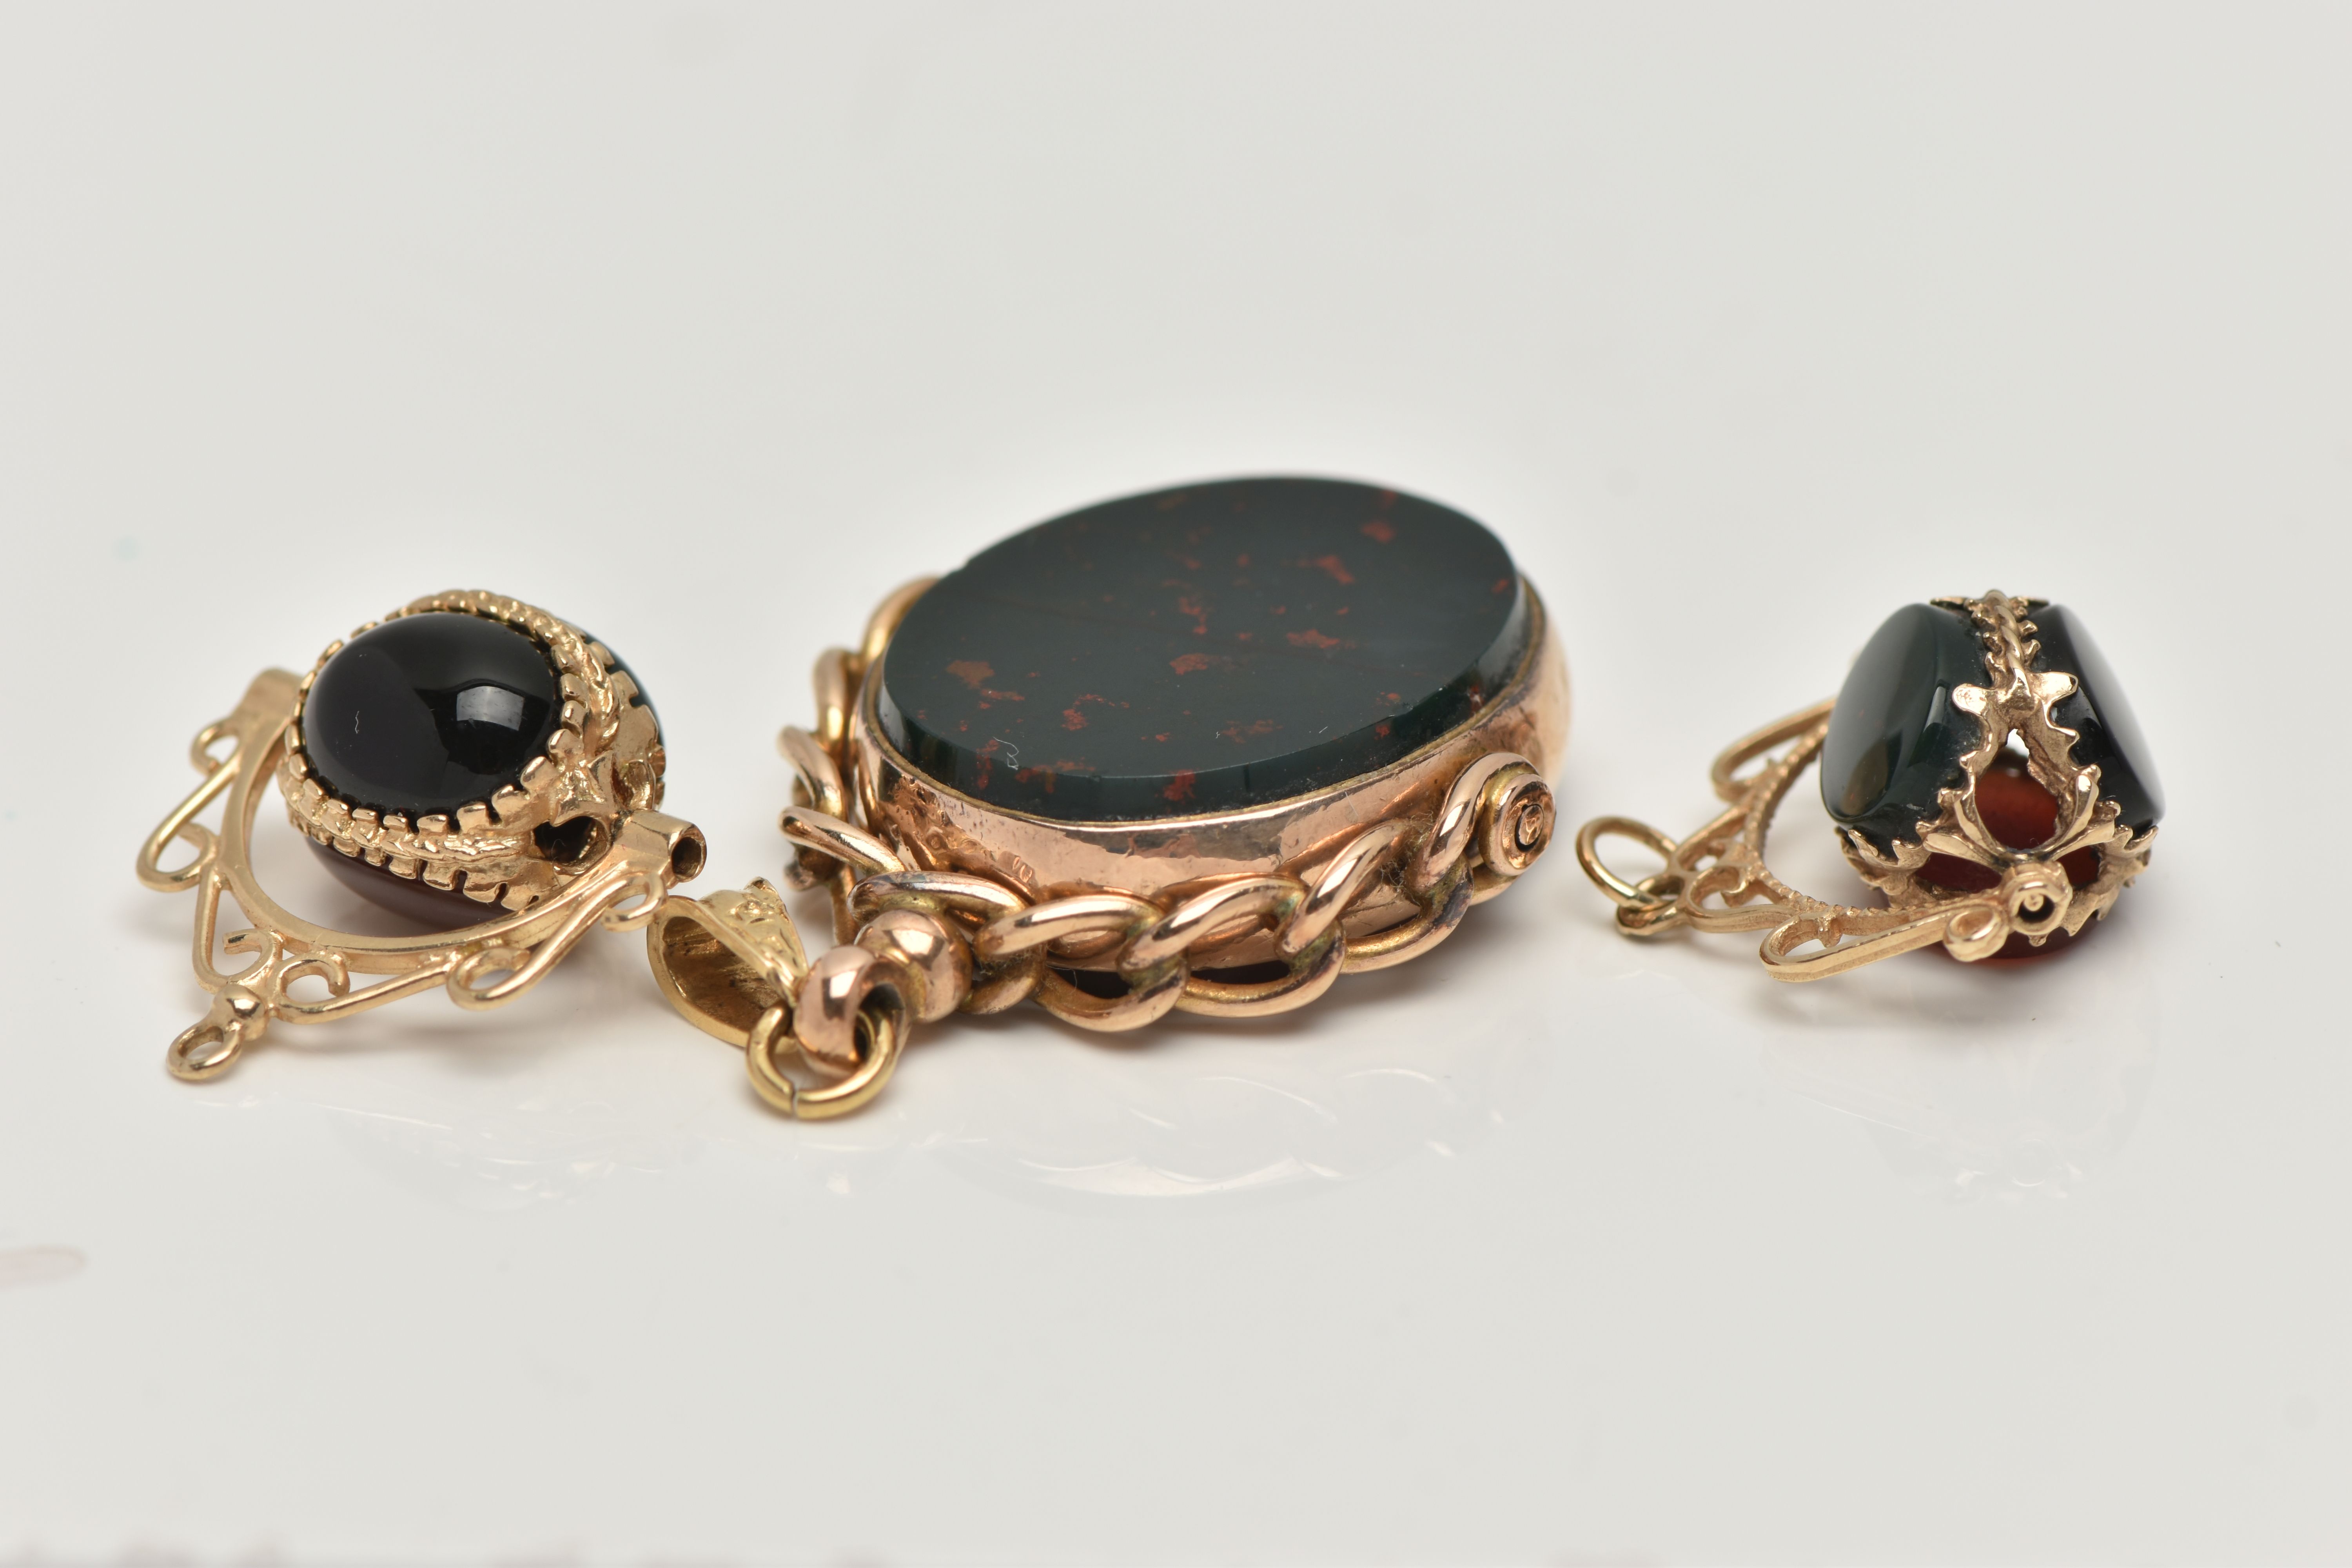 THREE SWIVEL PENDANTS, the first an oval swivel pendant set with a carnelian and a bloodstone inlay, - Image 3 of 4